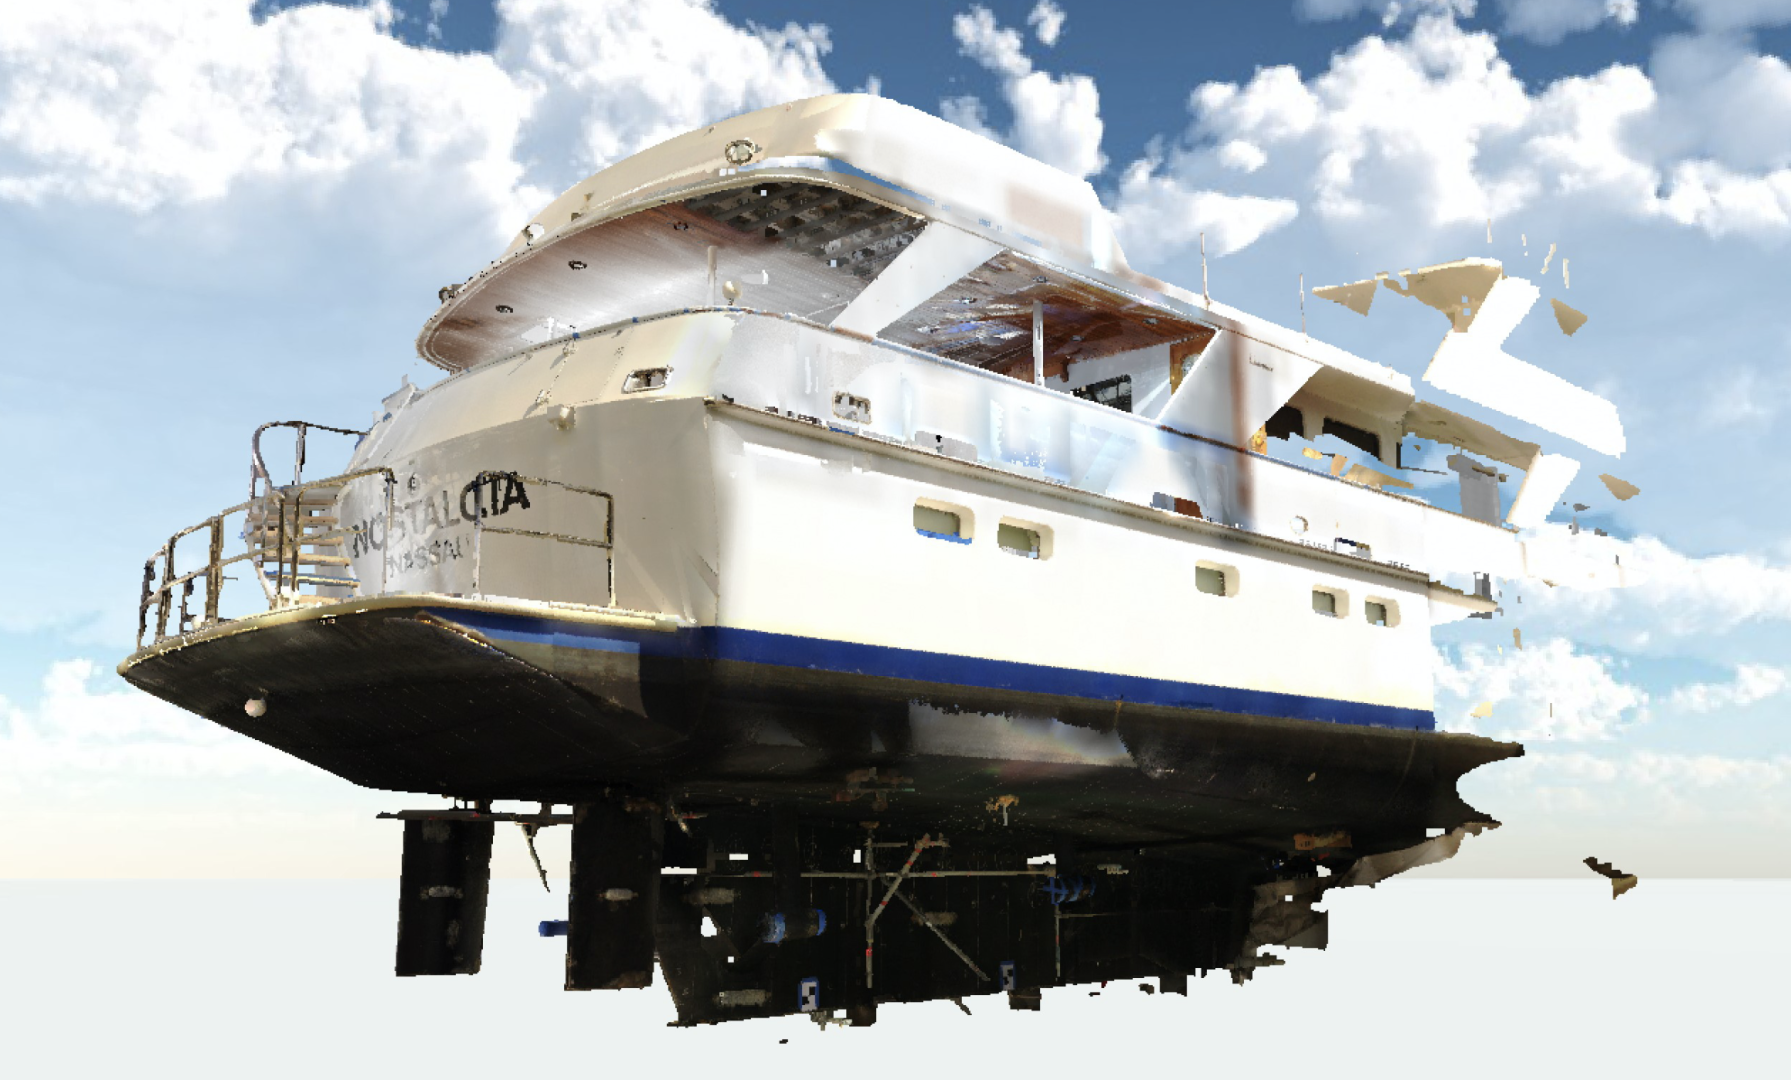 BYD Group passes a milestone with high-tech laser scanning in yachting industry